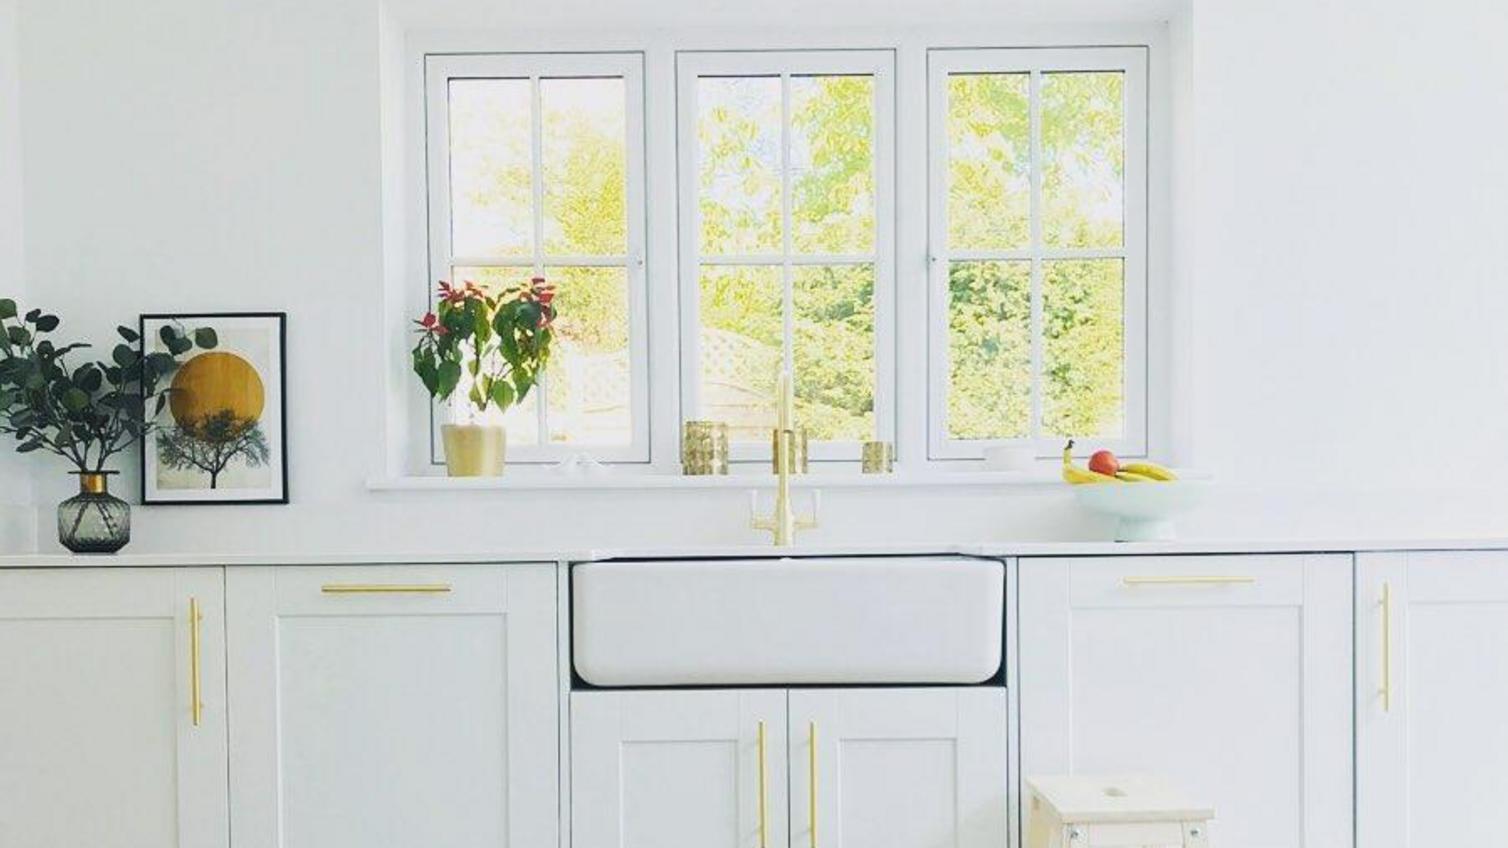 A modern farmhouse white kitchen idea that pairs a ceramic sink with crisp white shaker doors for an updated heritage look.